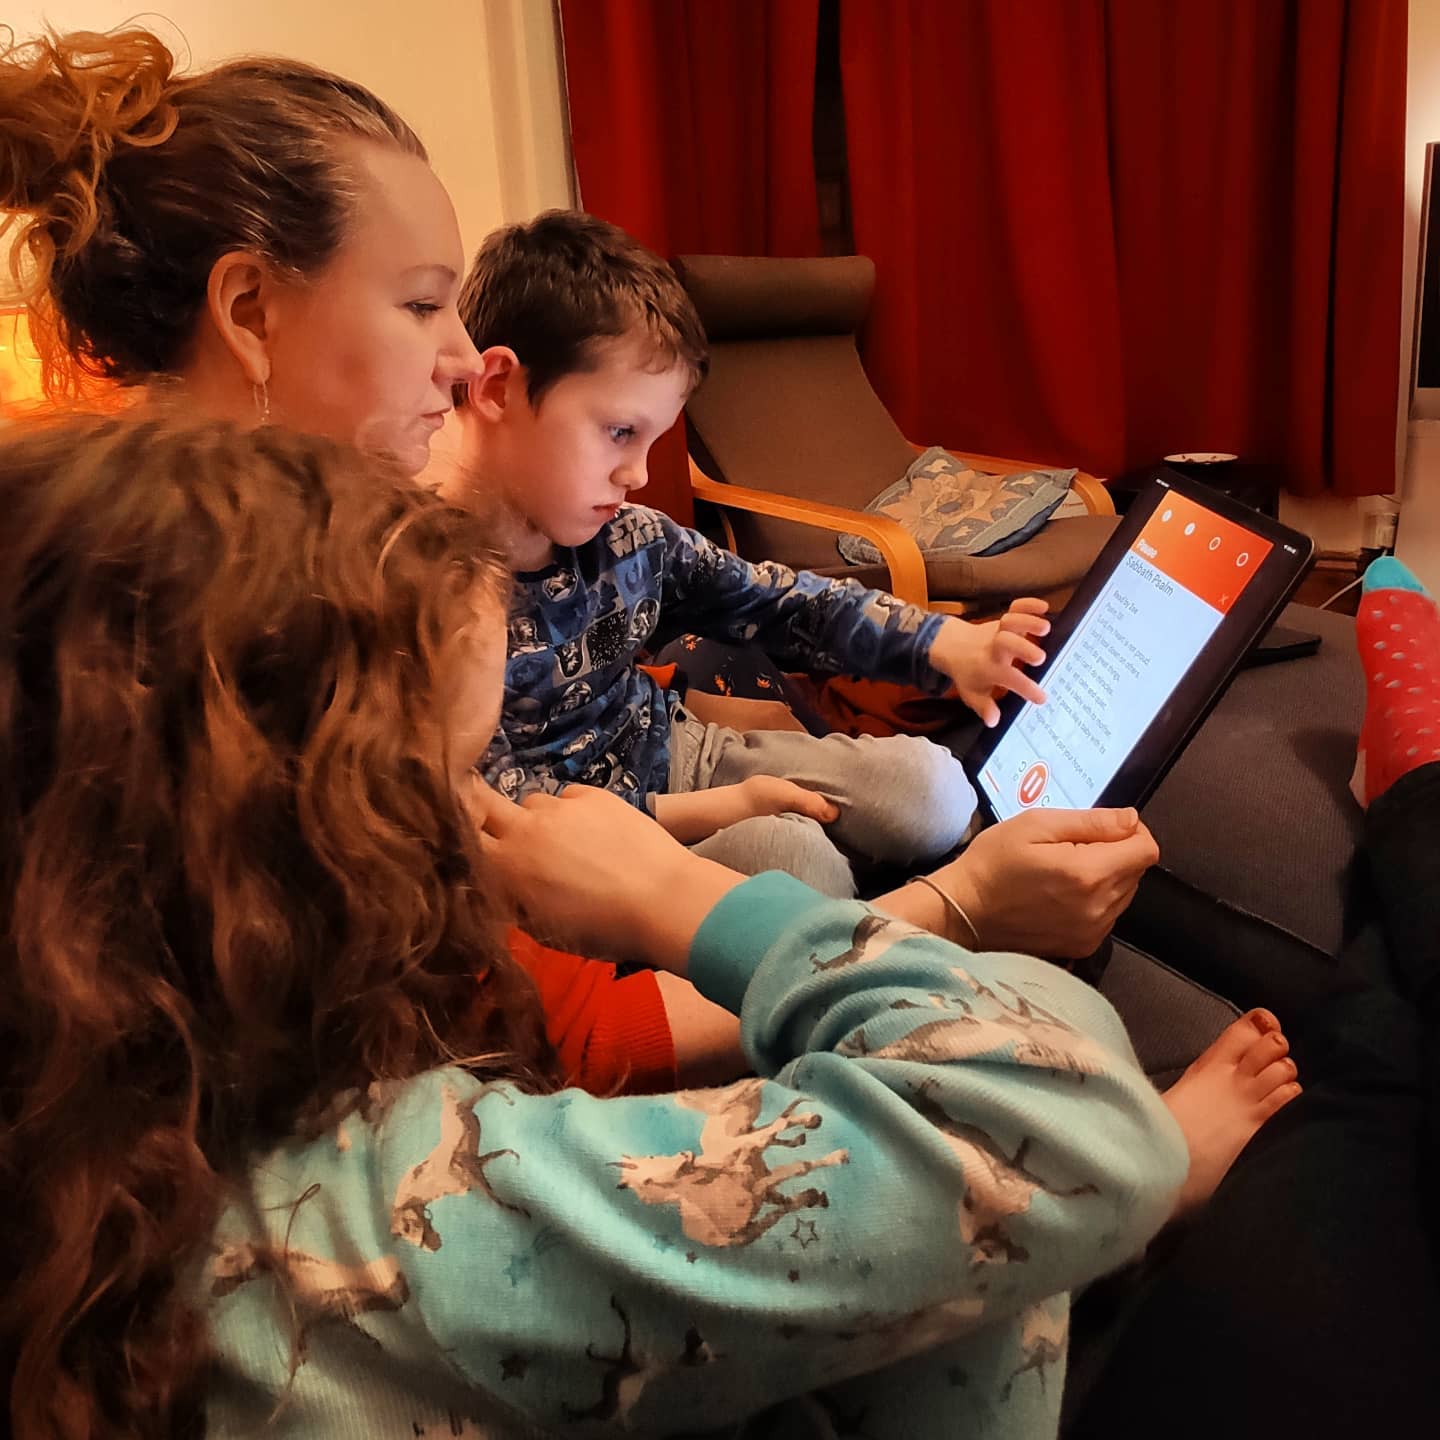 Really enjoying using the Lectio for Families app from @247prayer as part of our bedtime routine.The #twins love it and are really engaged with it.#lectio365 #lectioforfamilies #prayer #247prayer #familyprayer #EndTheDayRight